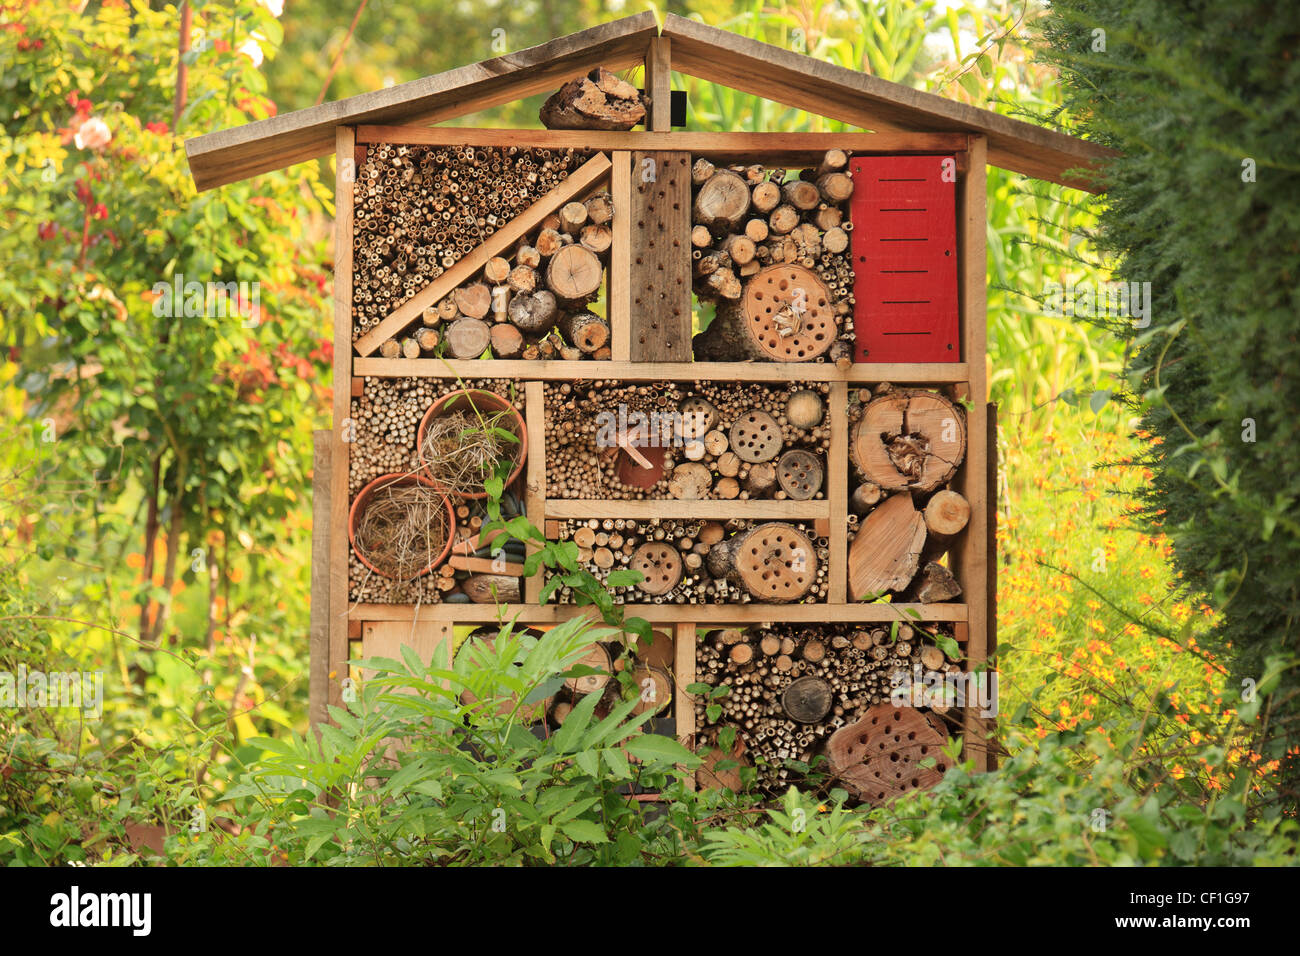 shelter for insects in a biological kitchen garden. Stock Photo